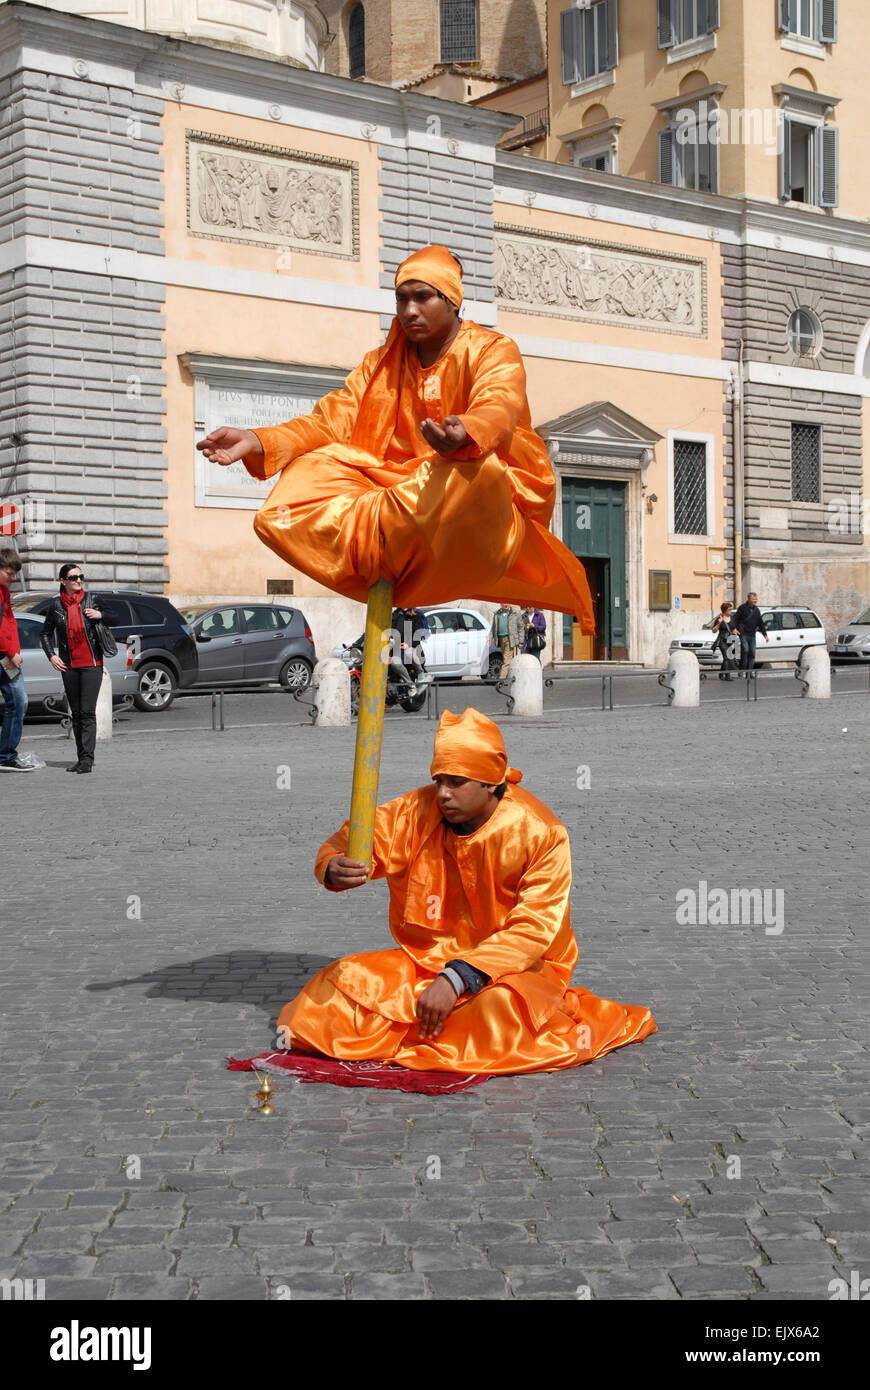 Levitation Trick High Resolution Stock Photography and Images - Alamy